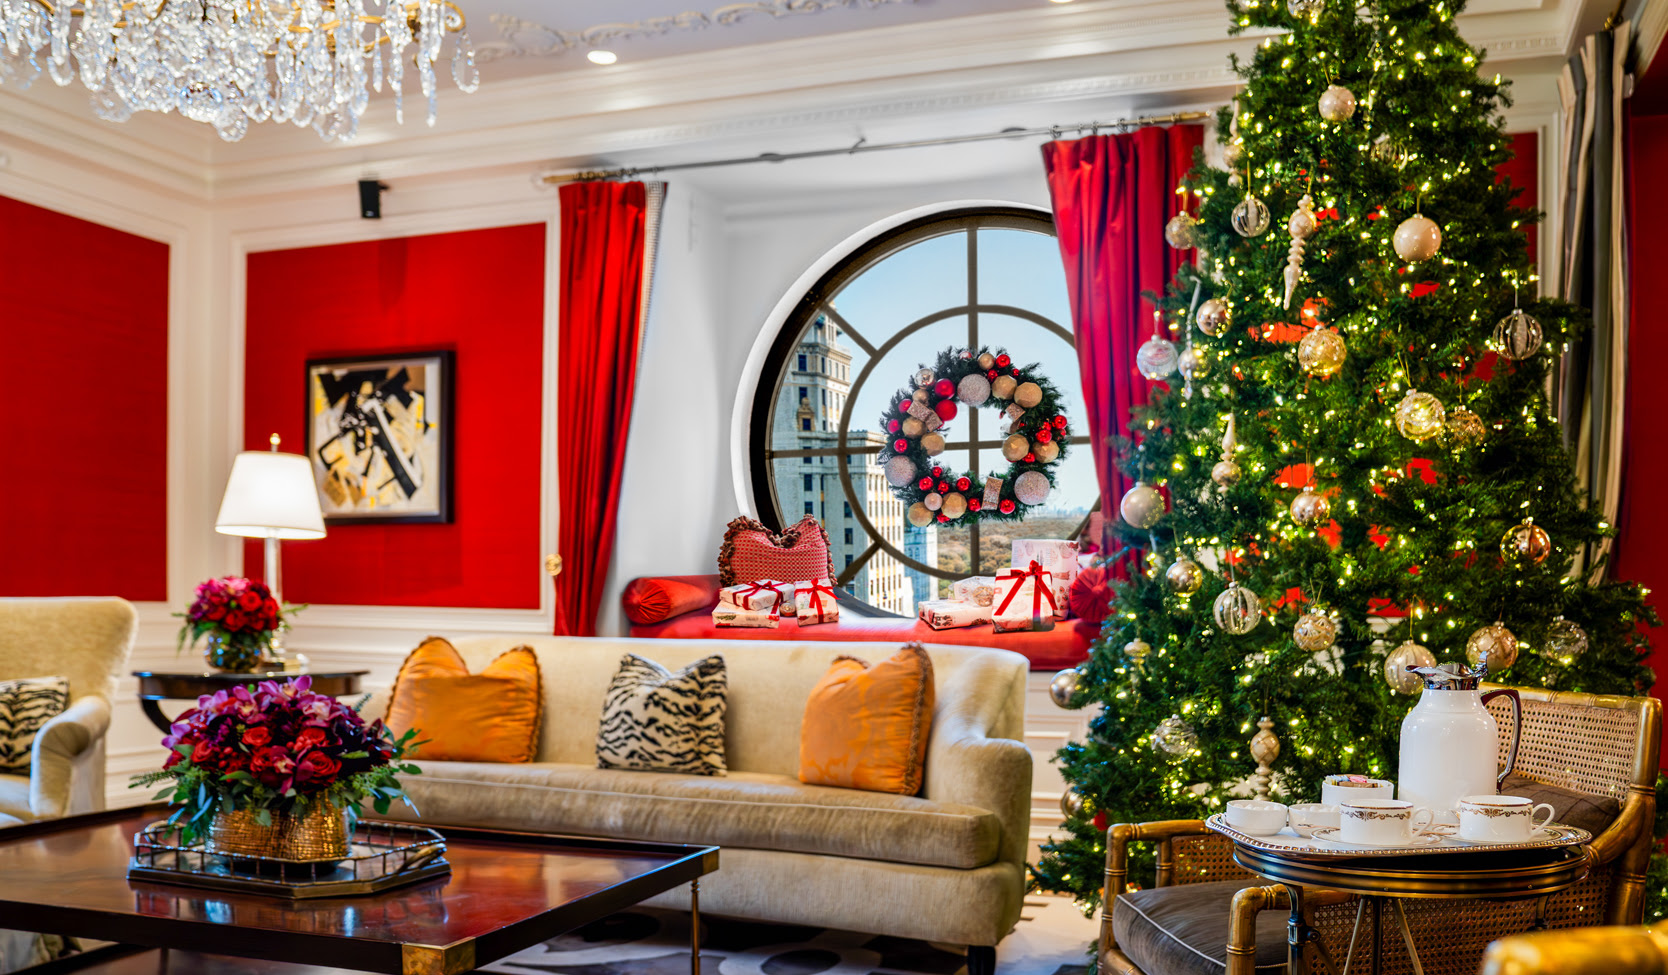 Lartisien - Book yourself a magical Christmas in New York!